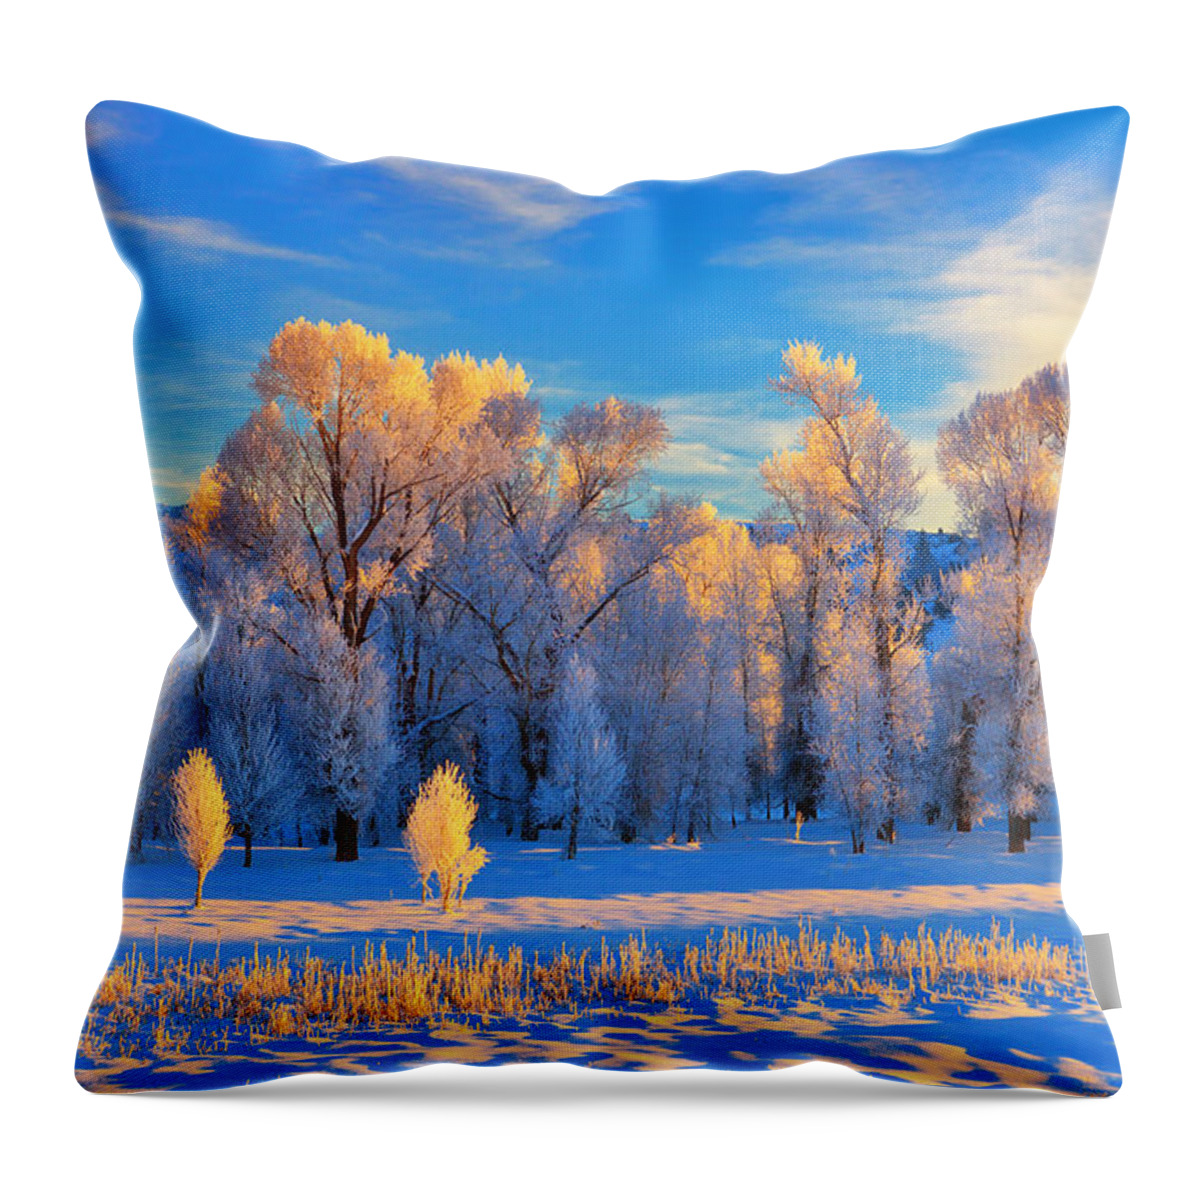 Sunrise Throw Pillow featuring the photograph Frozen Sunrise by Greg Norrell